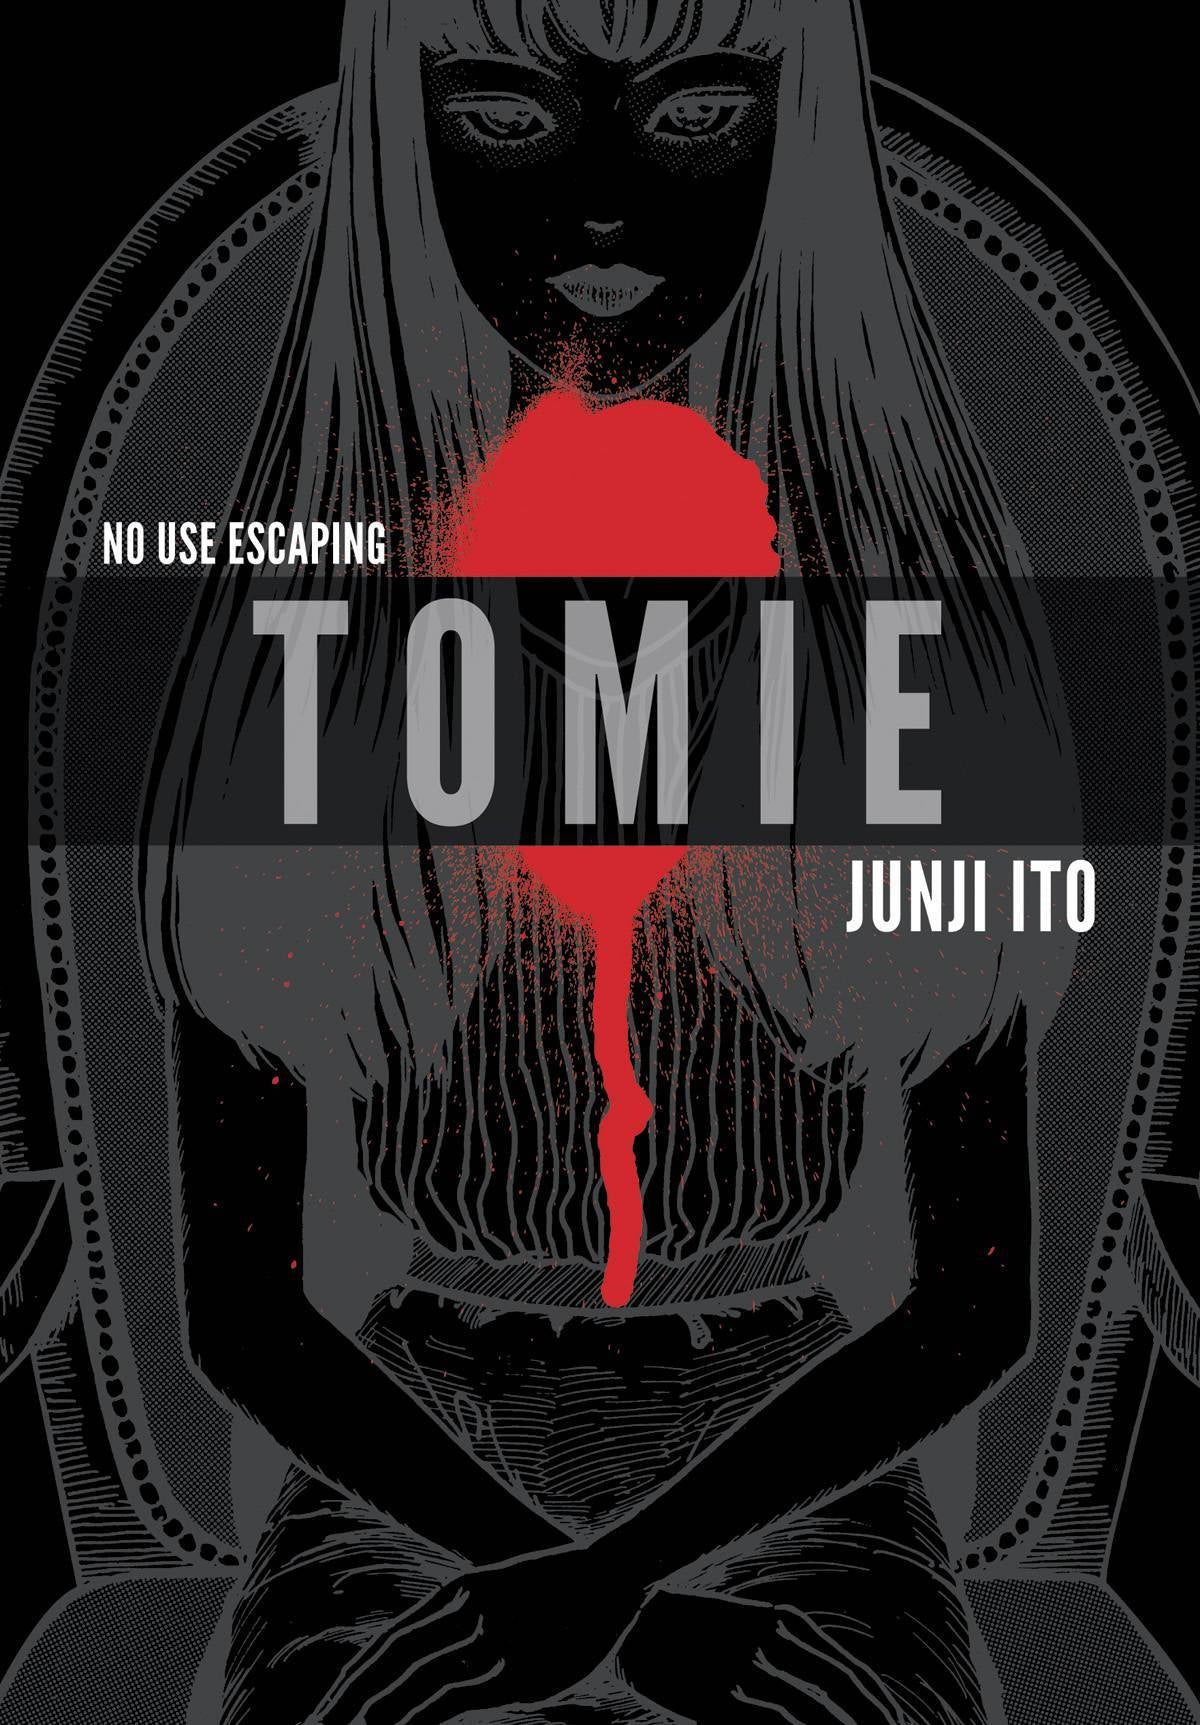 TOMIE COMPLETE DELUXE EDITION by JUNJI ITO